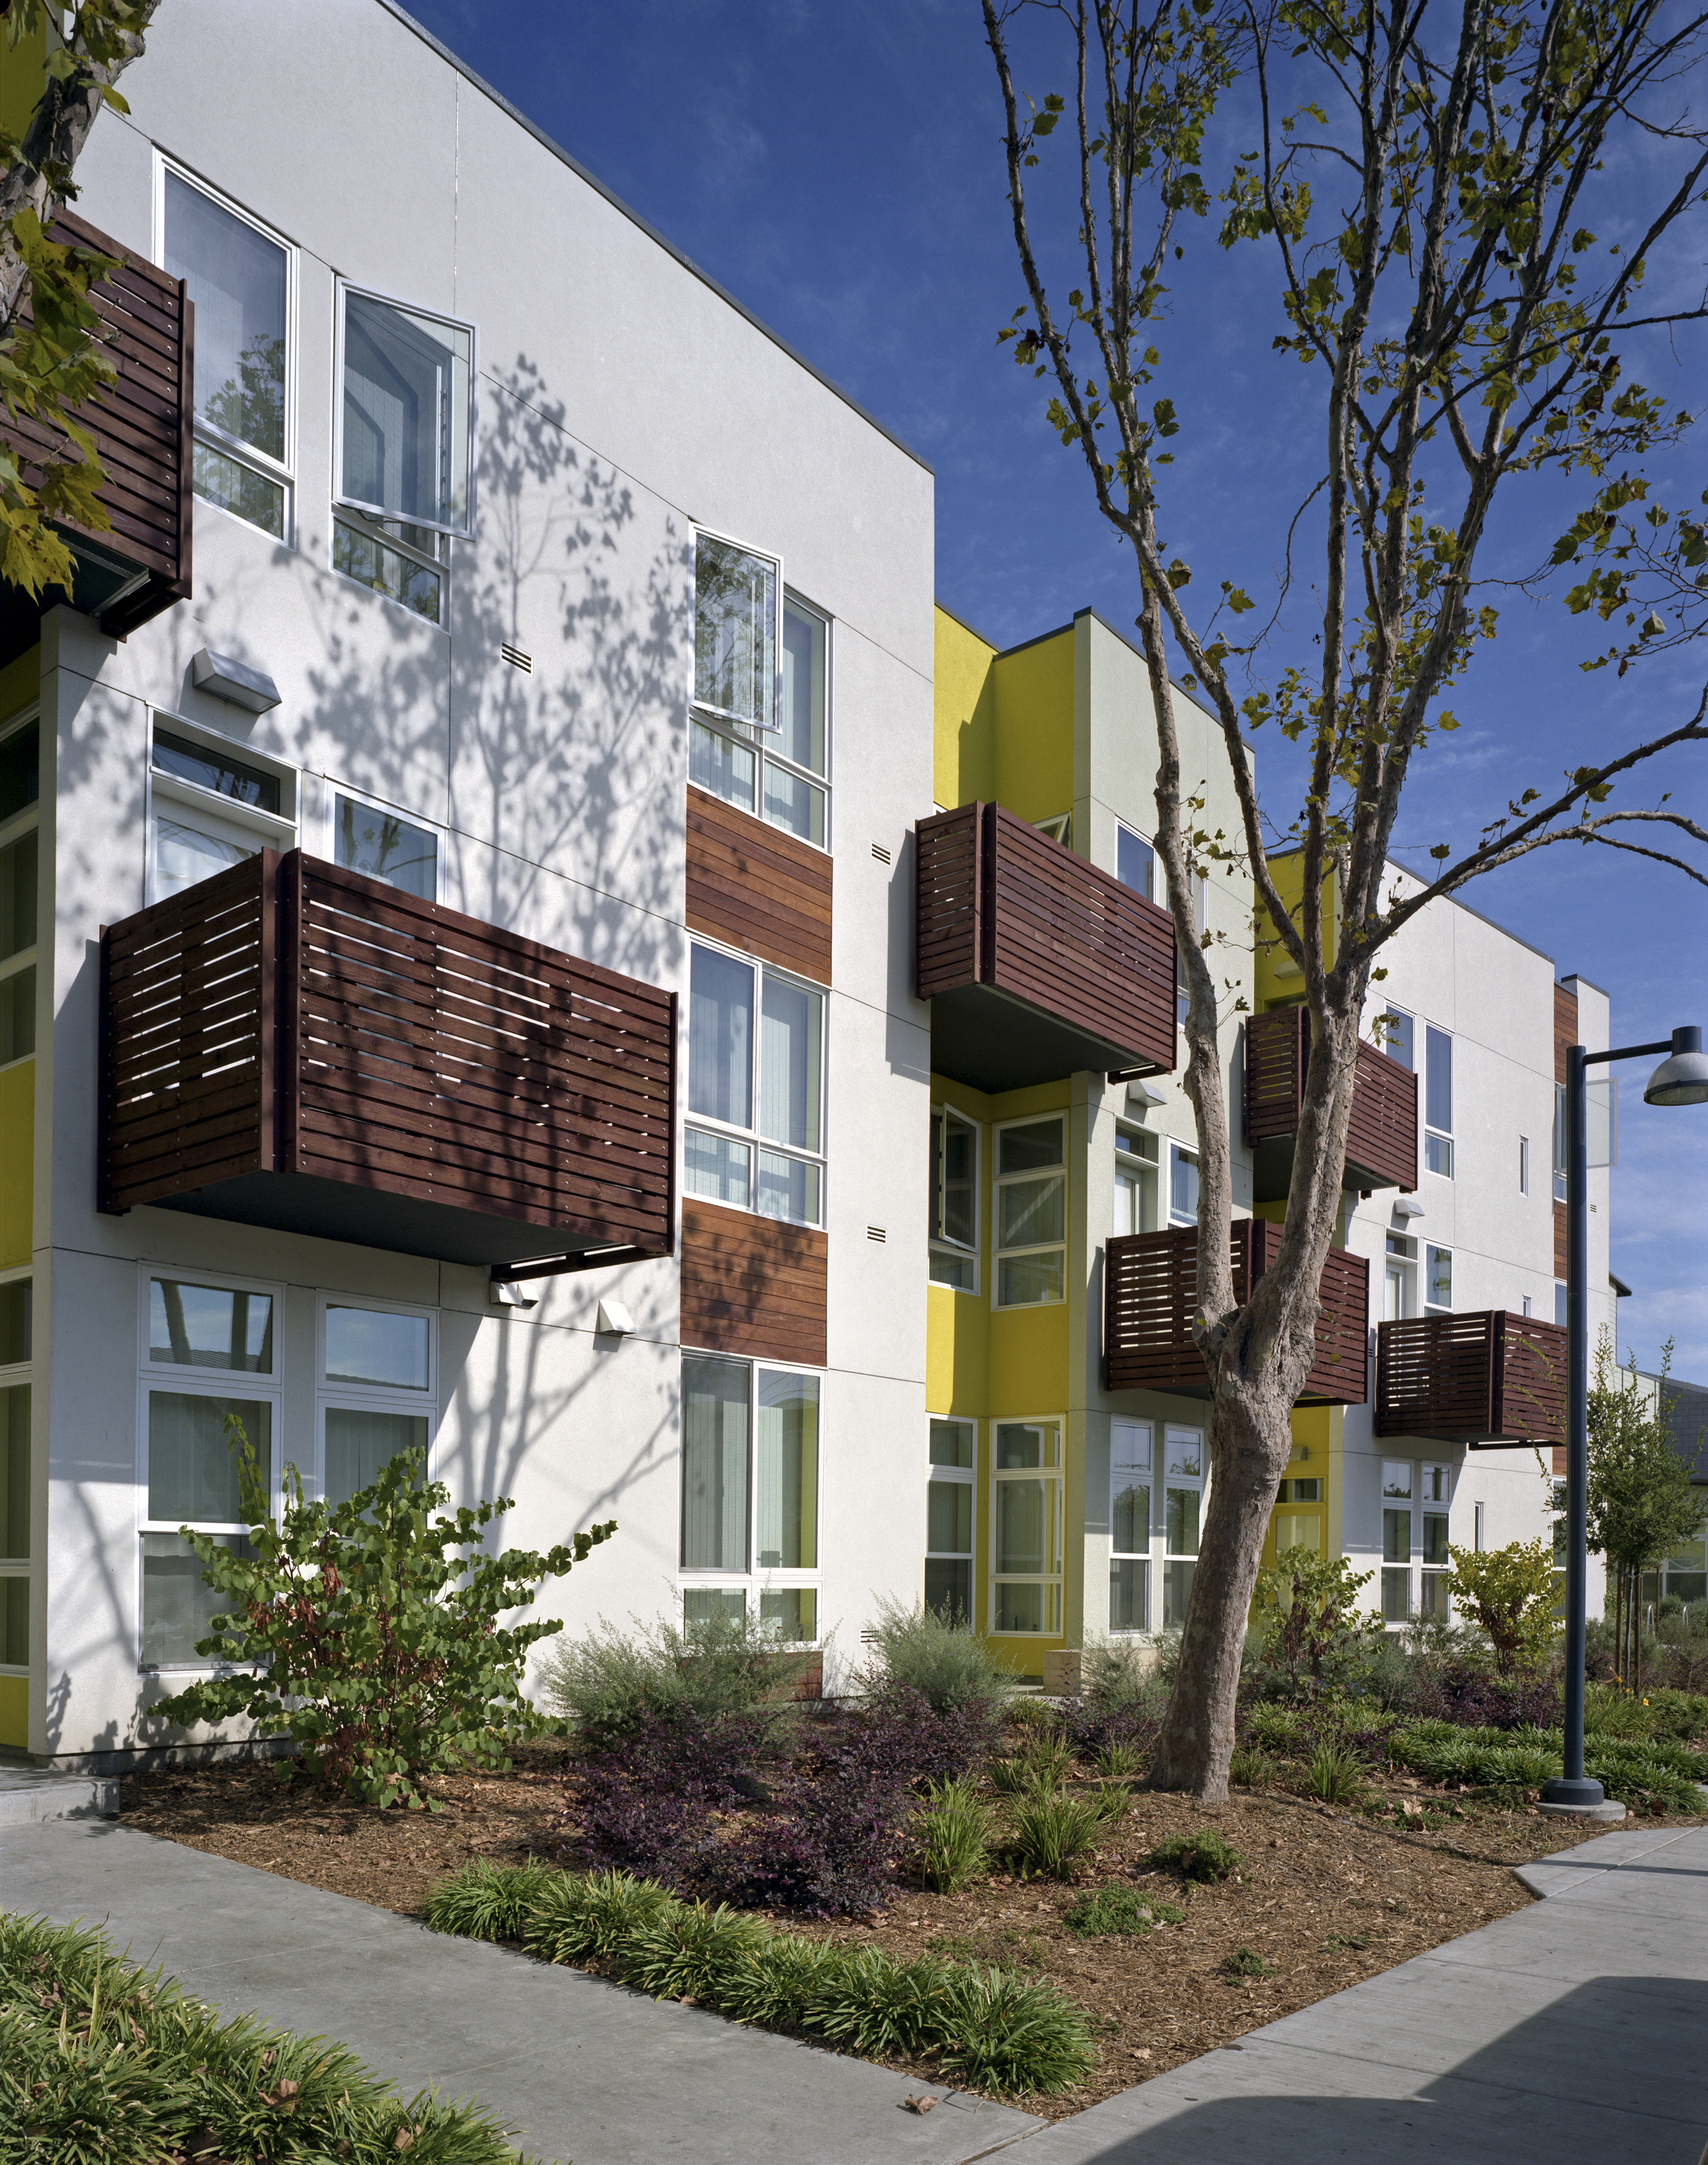 Elevation with wood-slat balconies and a planted sidewalk pathway Tassafaronga Village in East Oakland, CA. . 